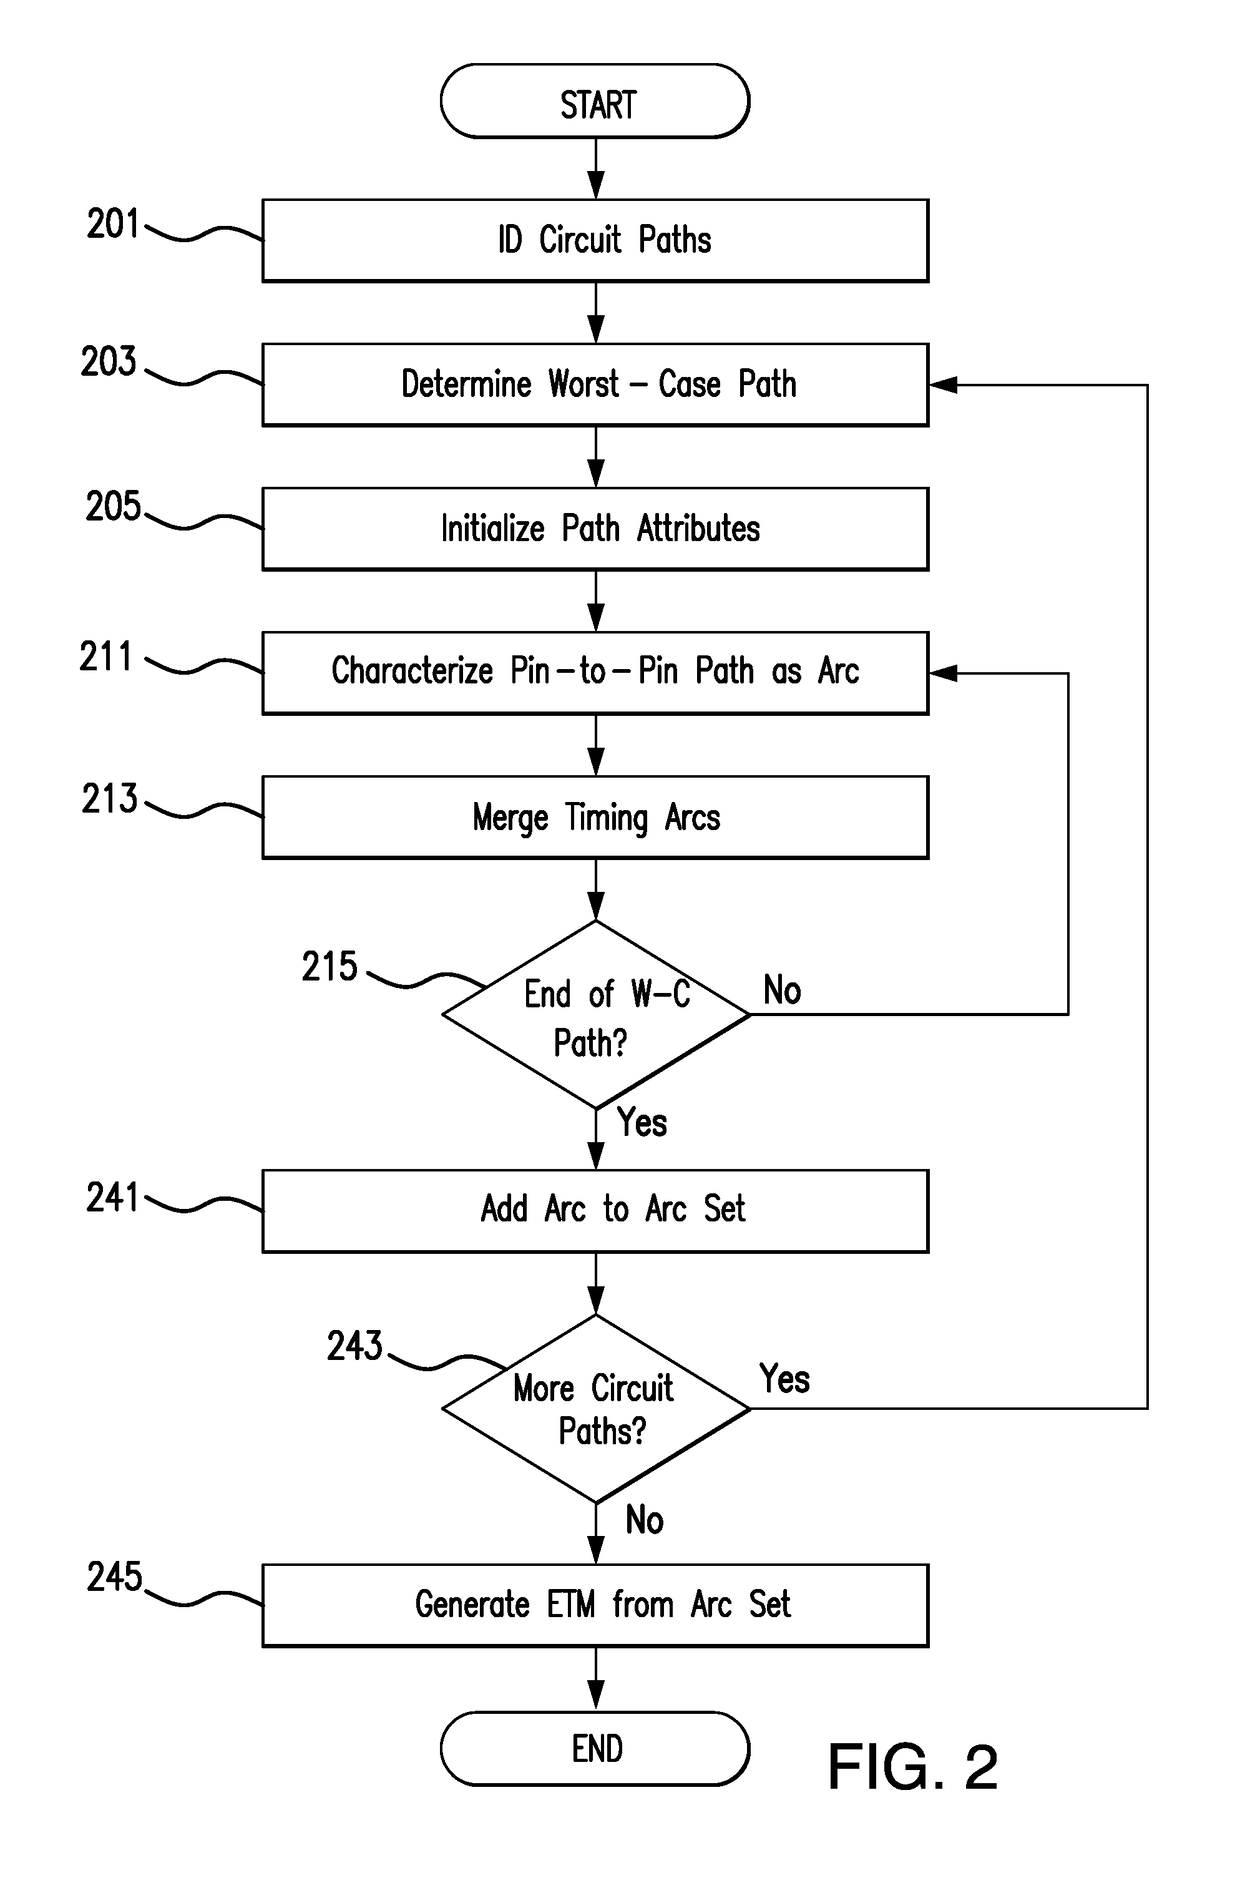 Method and apparatus for efficient generation of compact waveform-based timing models